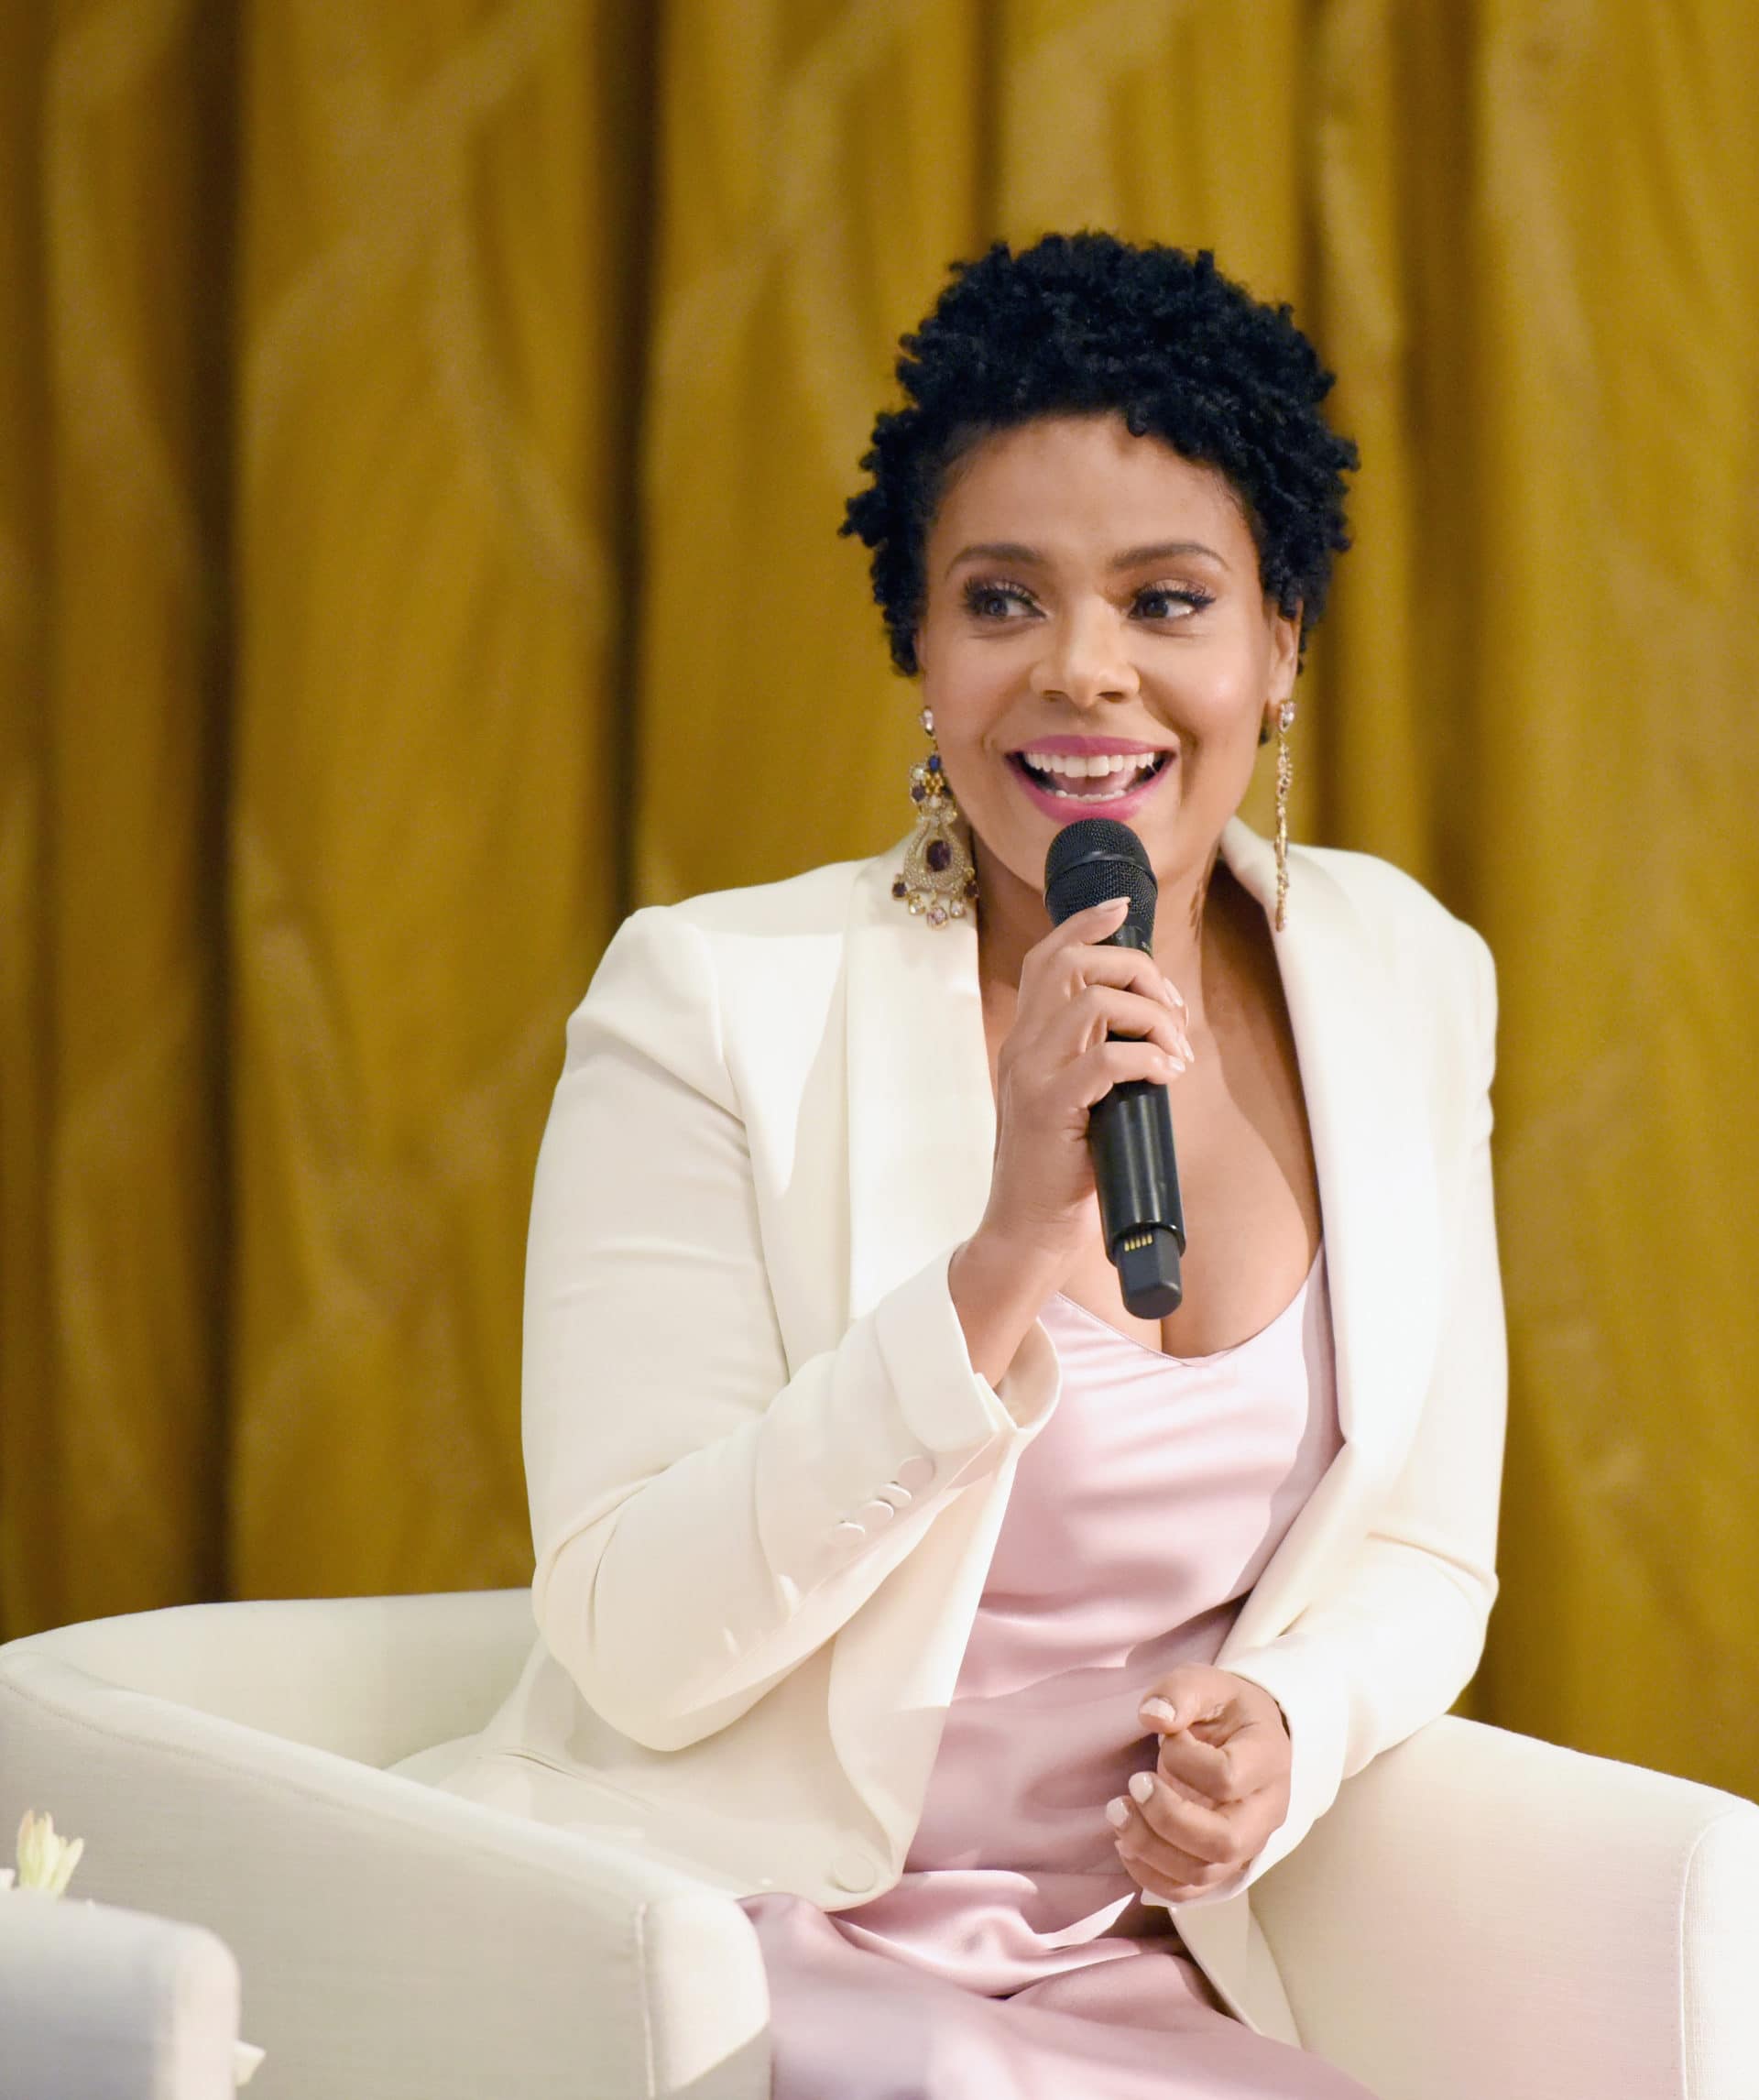 Sanaa Lathan Shares What it Means to ‘Lead Like a Woman’ at Ralph Lauren Event